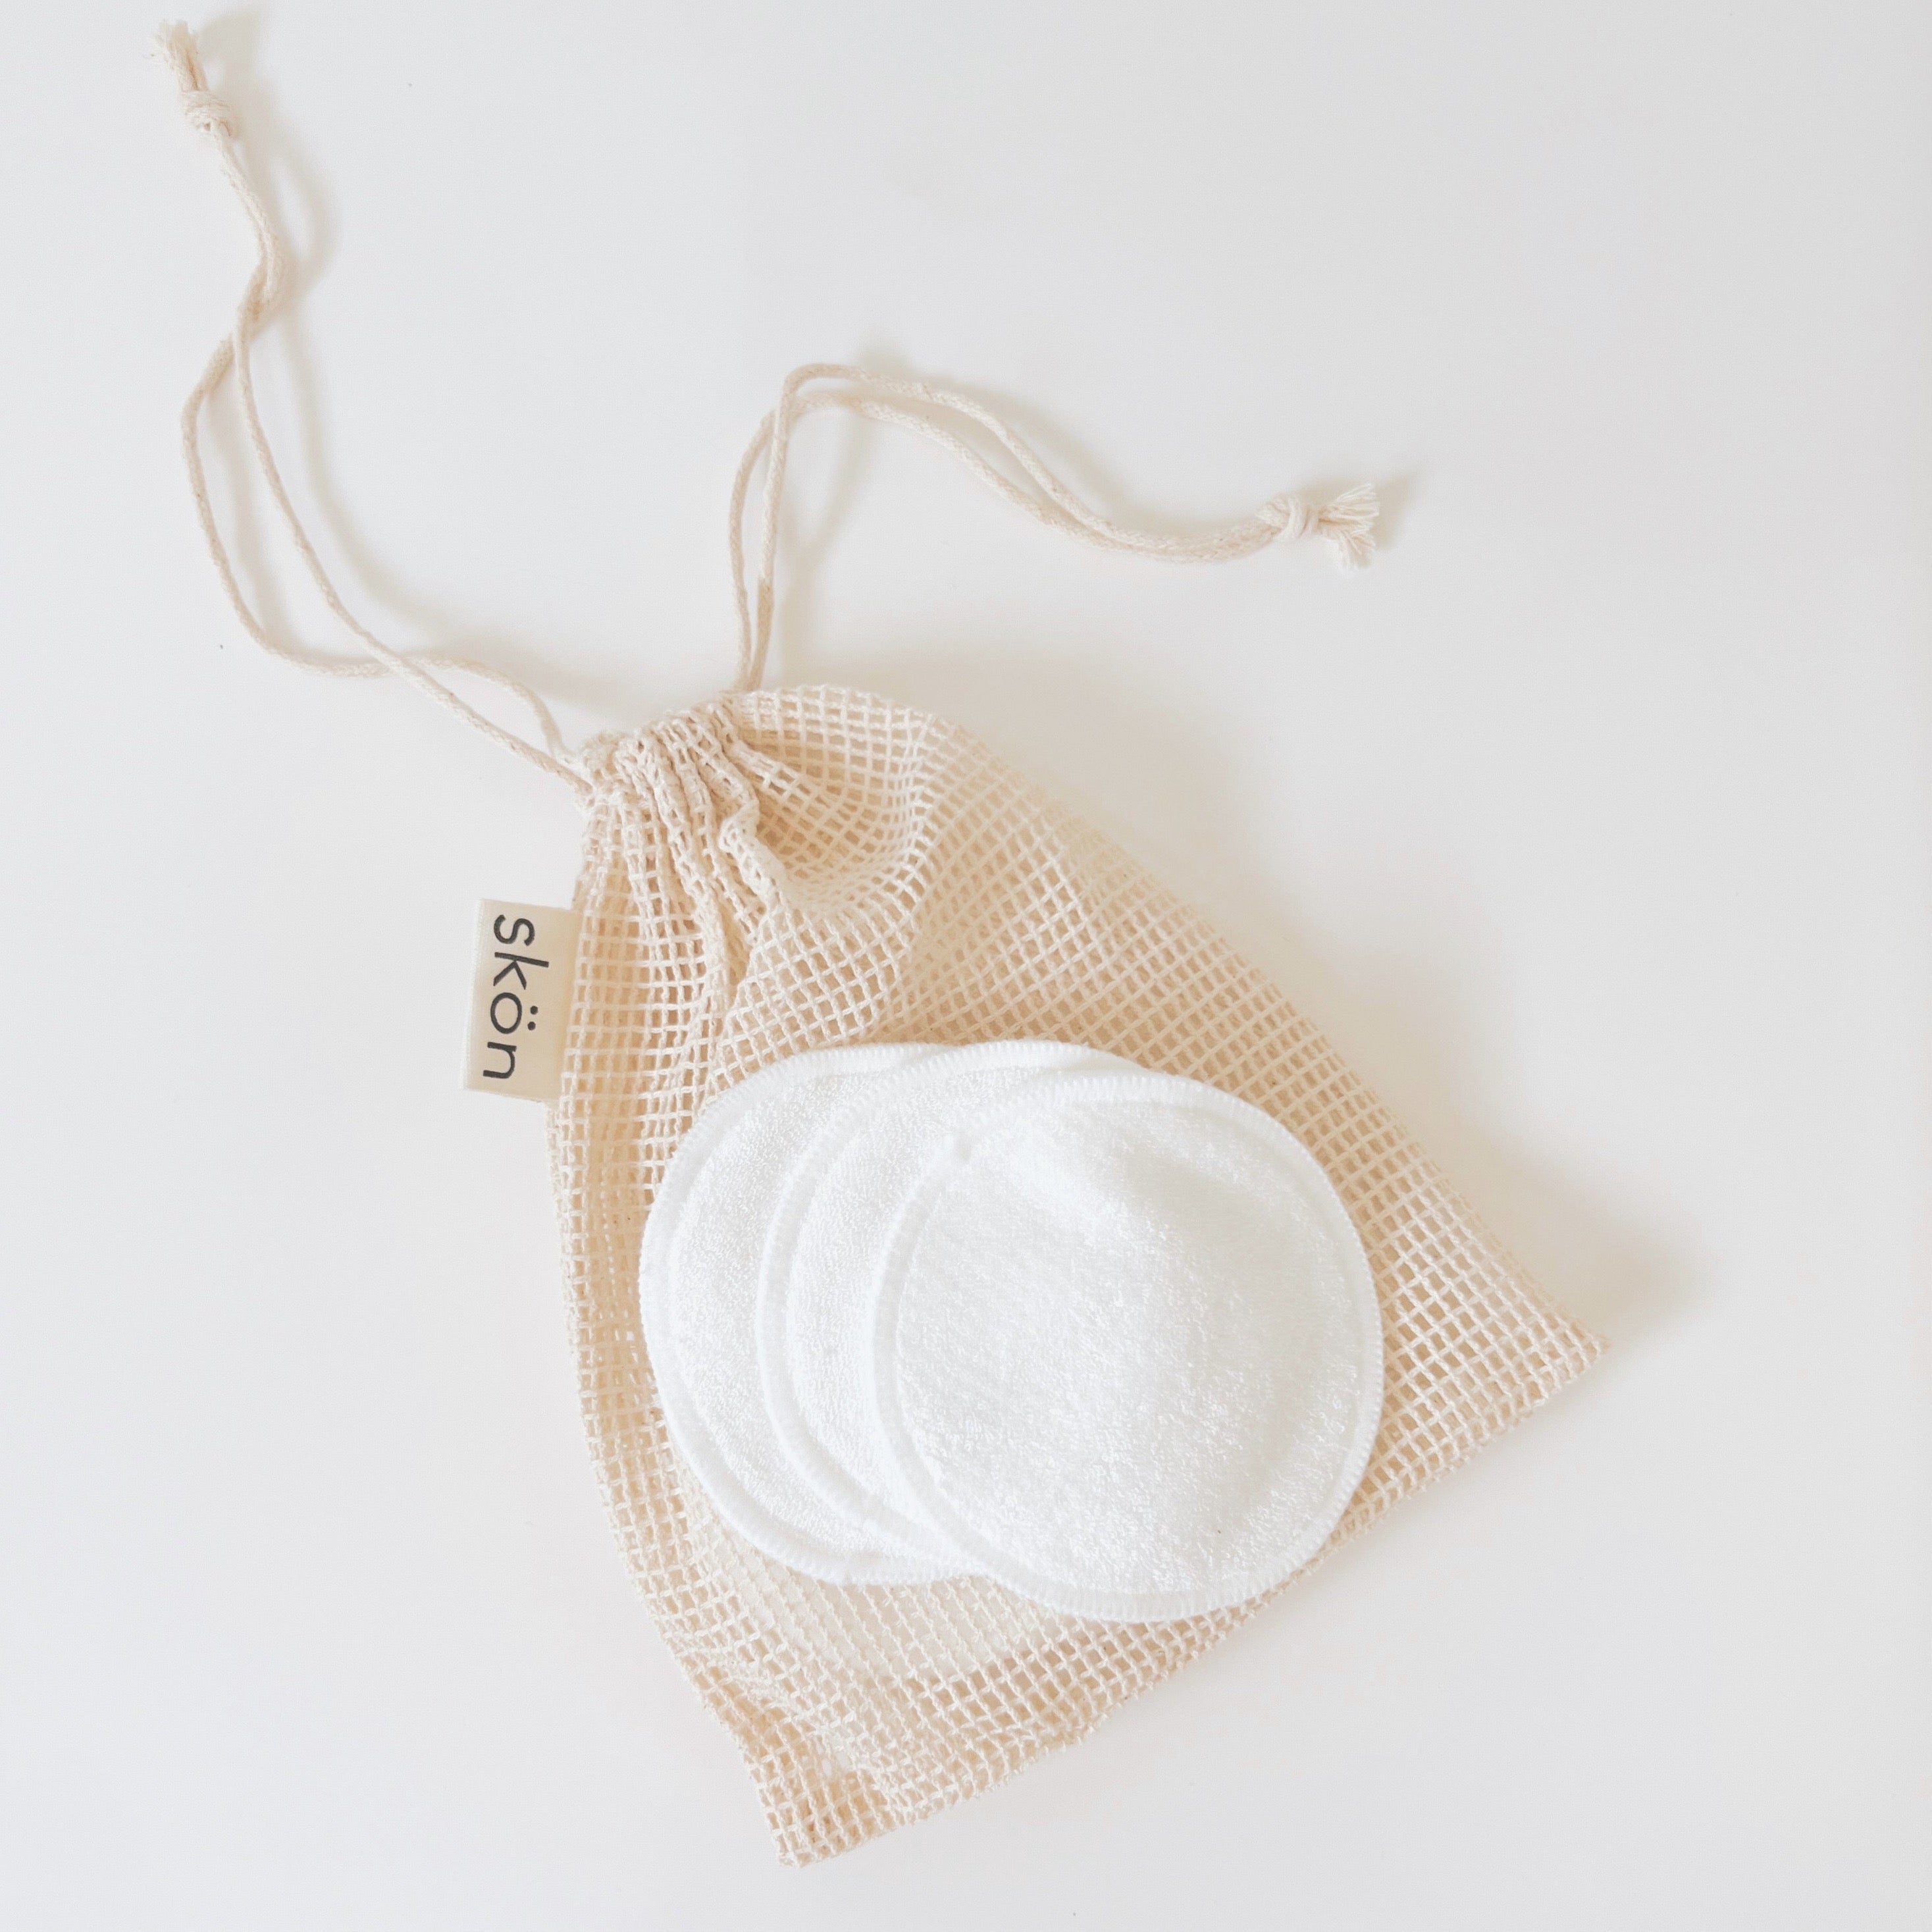 8 reusable bamboo cotton makeup rounds laying on a tan colored mesh bag against a white marble background